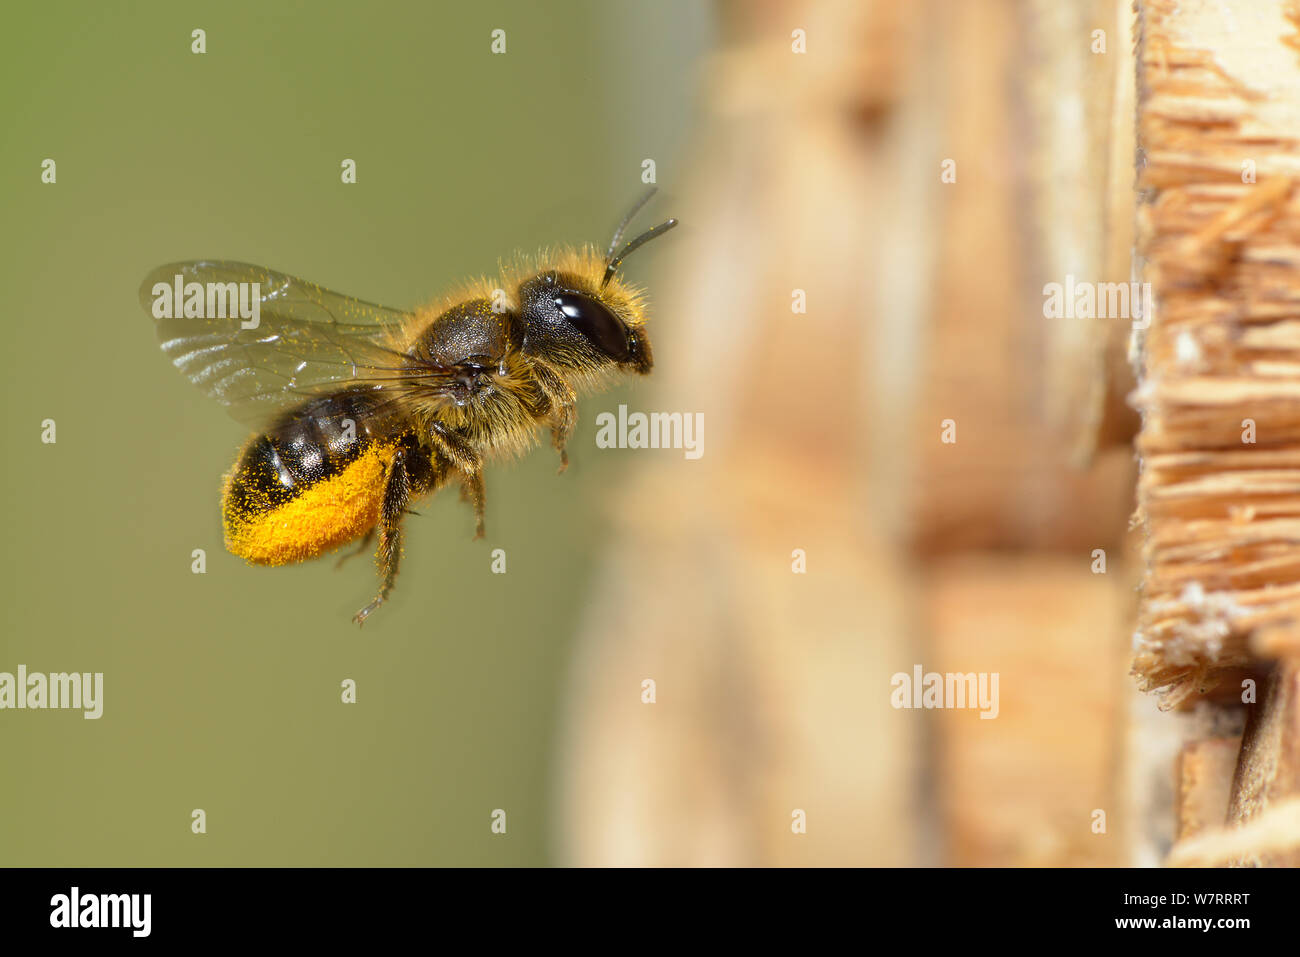 Female Blue mason bee (Osmia caerulescens) carrying pollen on its abdominal scopa (pollen carrying hairs) to a nest cell in an insect box, Hertfordshire, England, June. Stock Photo